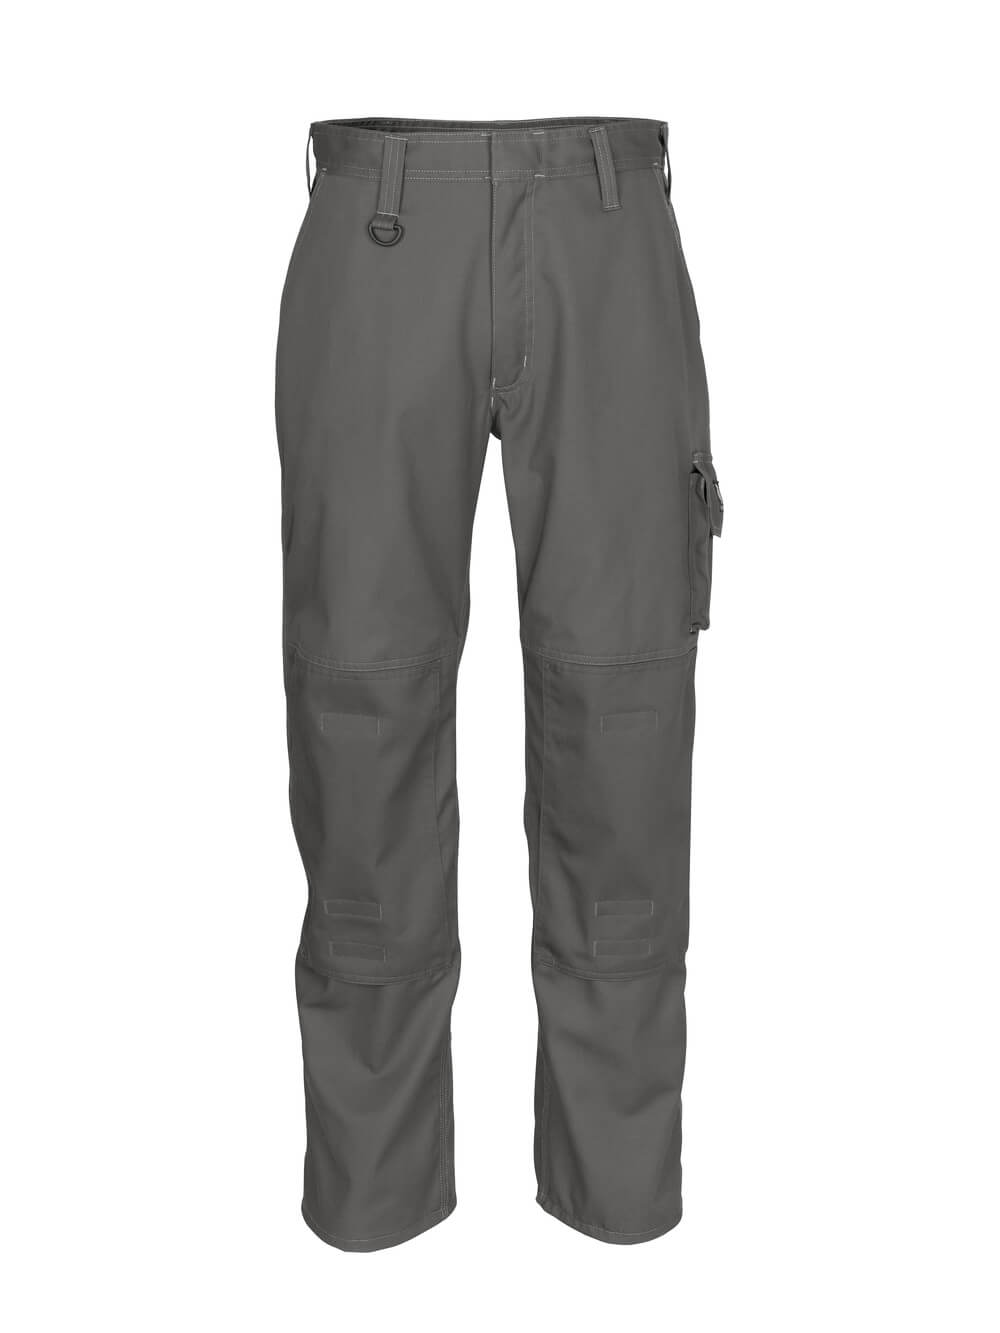 MASCOT® Biloxi INDUSTRY Trousers with kneepad pockets 12355